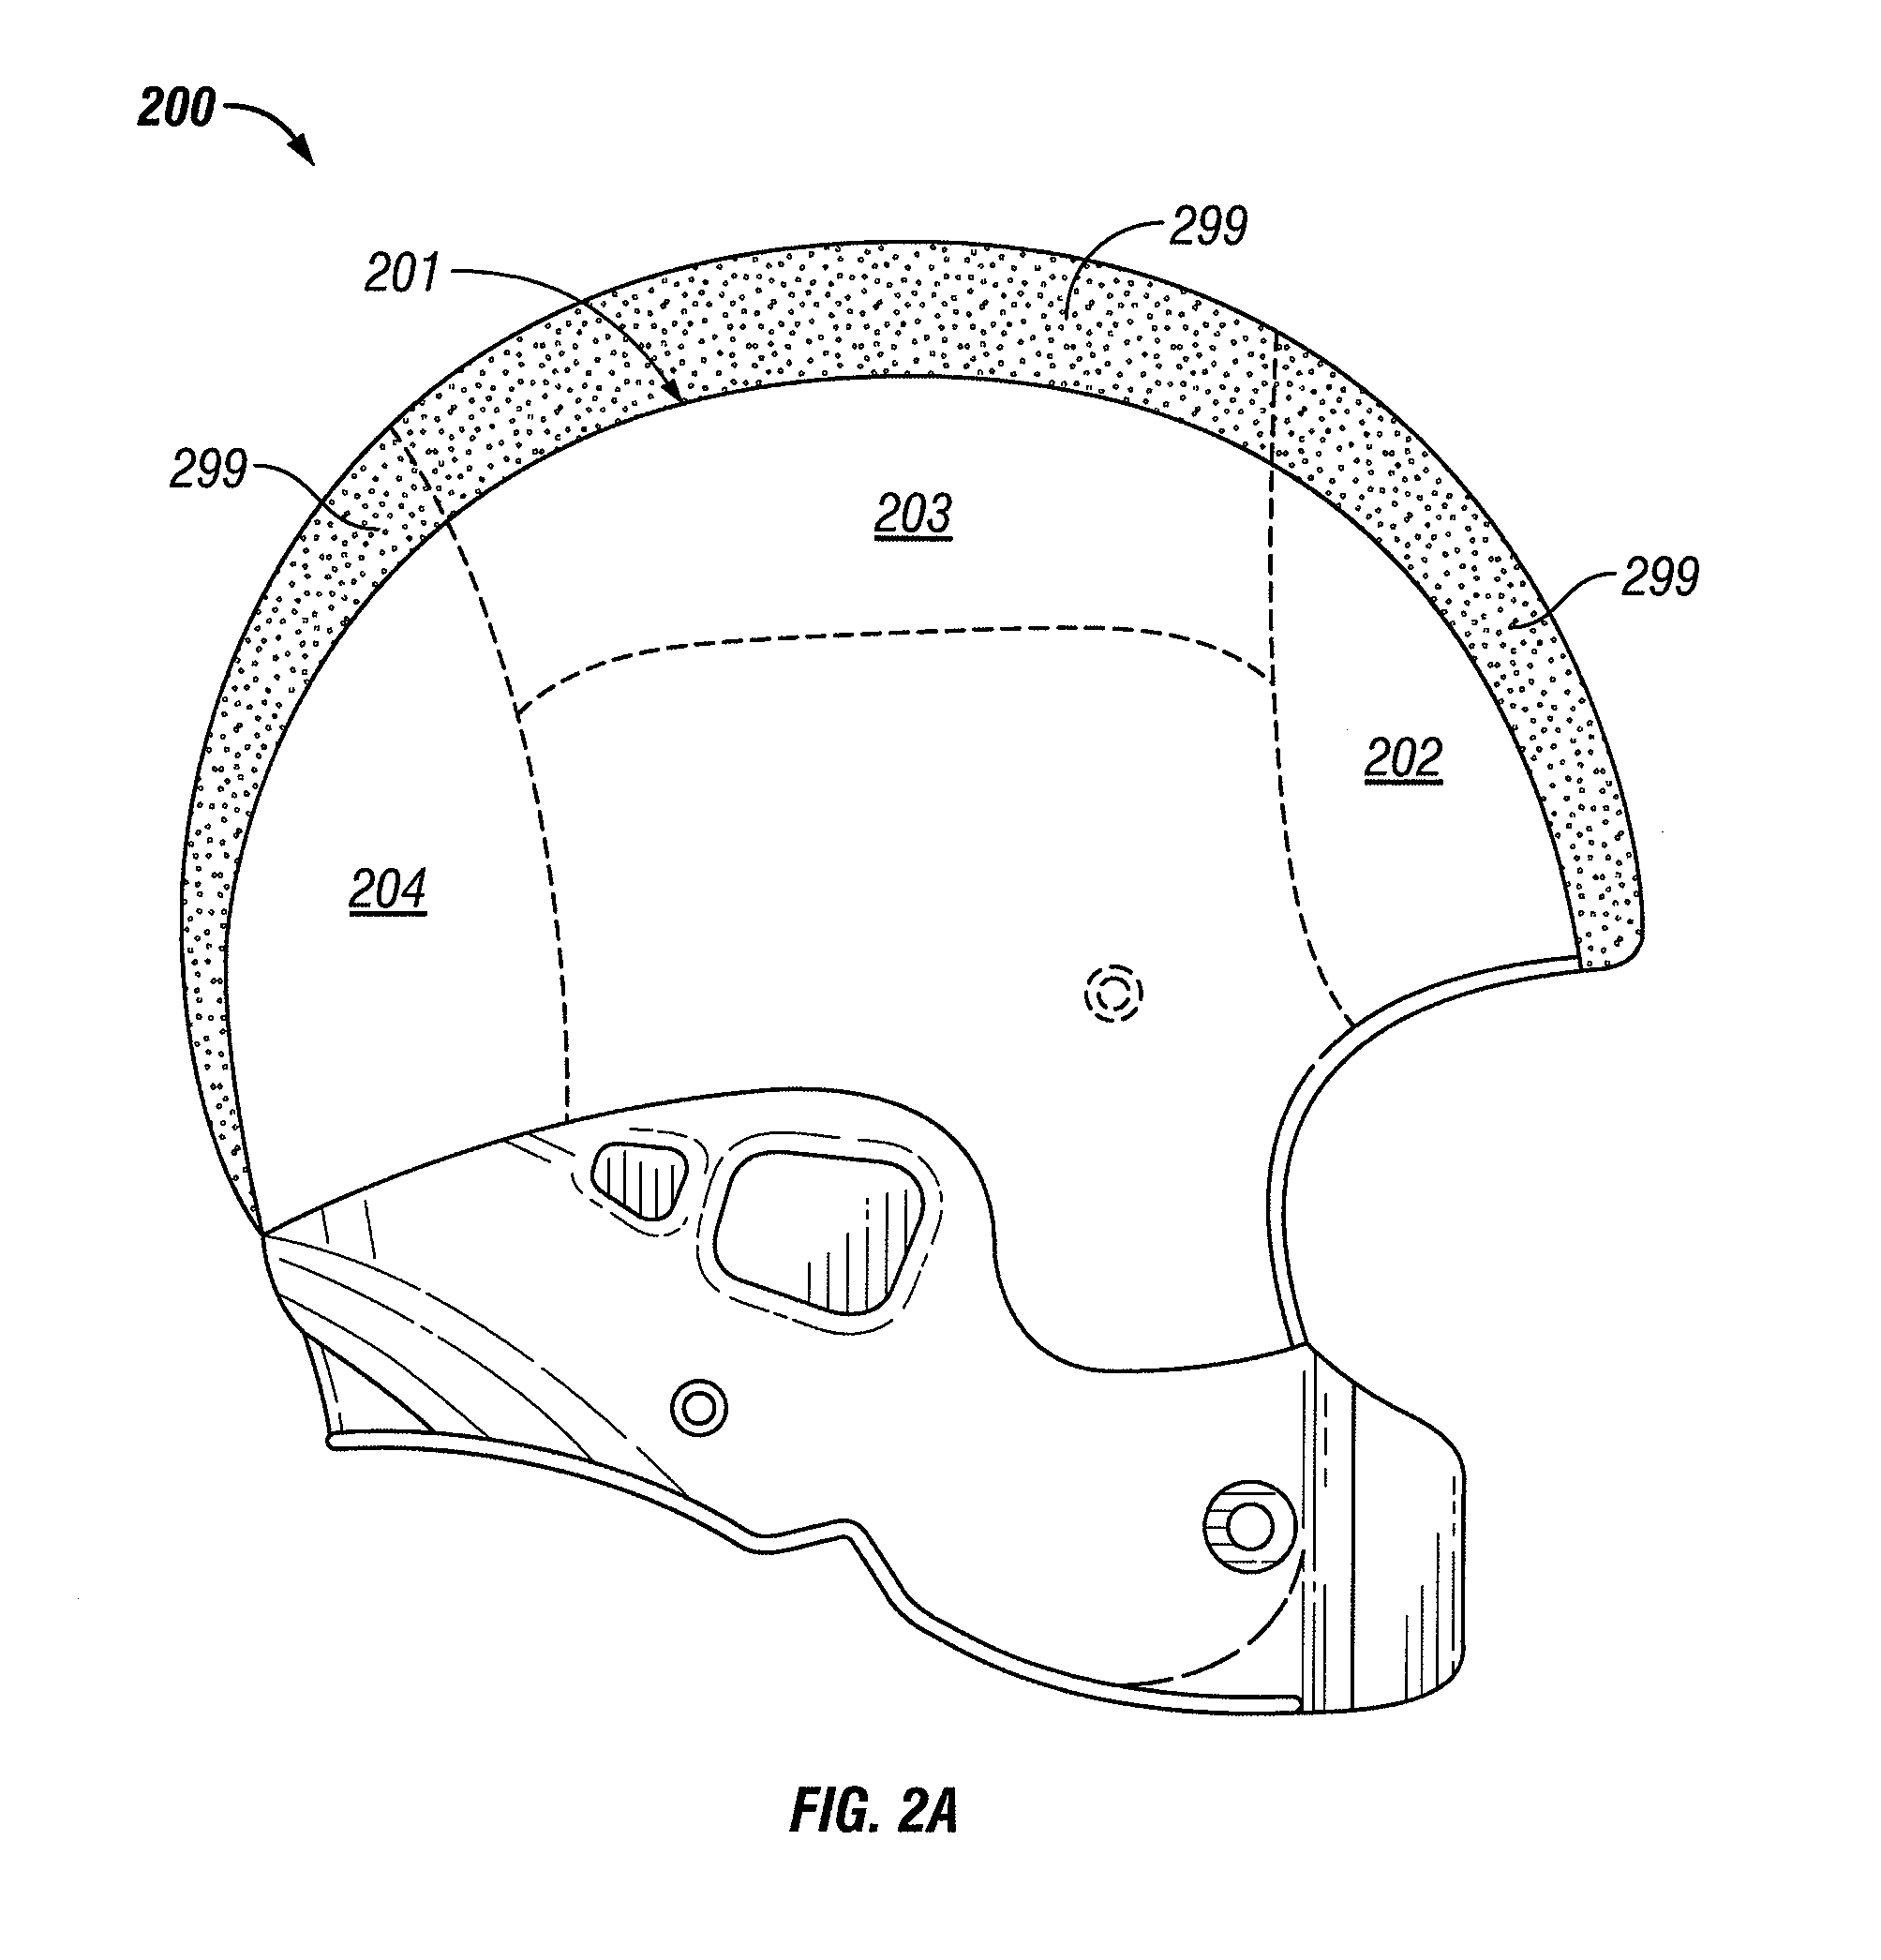 Protective sports helmet with energy-absorbing padding and a facemask with force-distributing shock absorbers